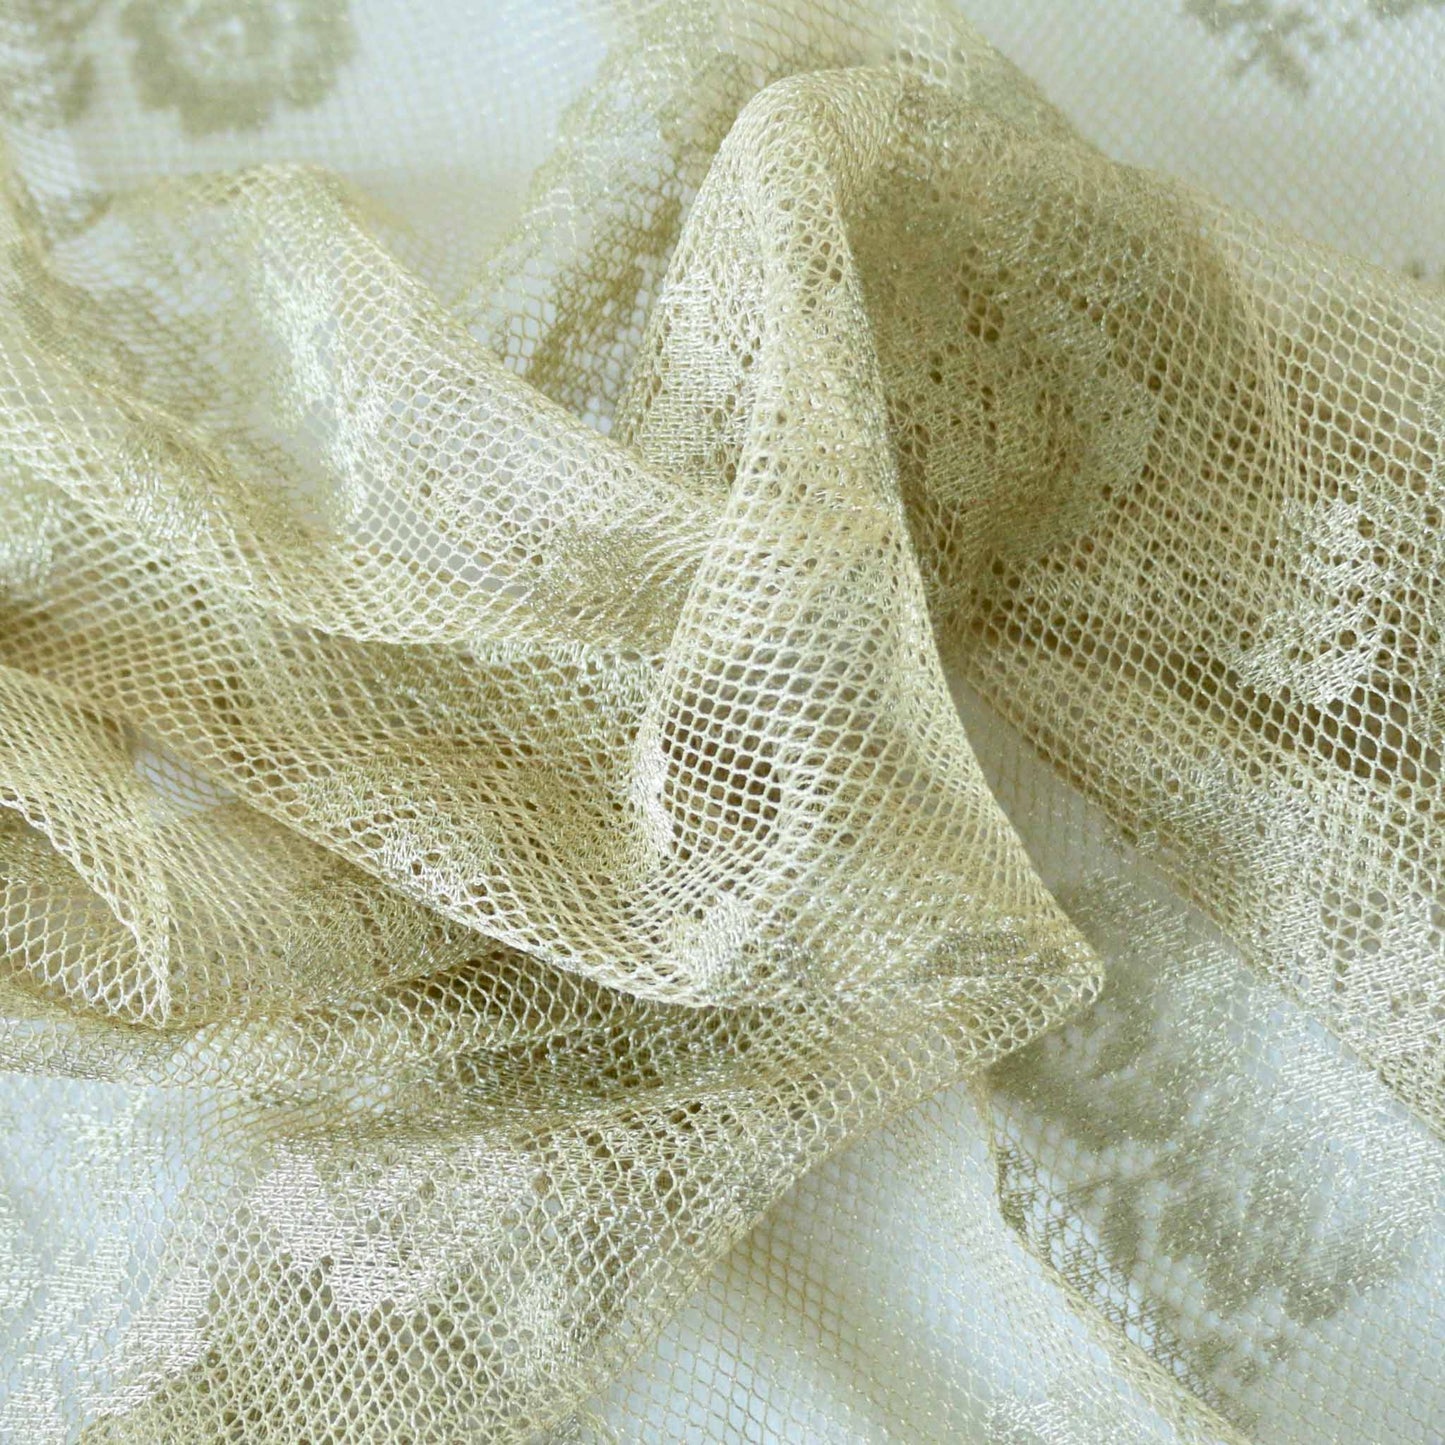 rose design on delicate gold lace fabric for dressmaking